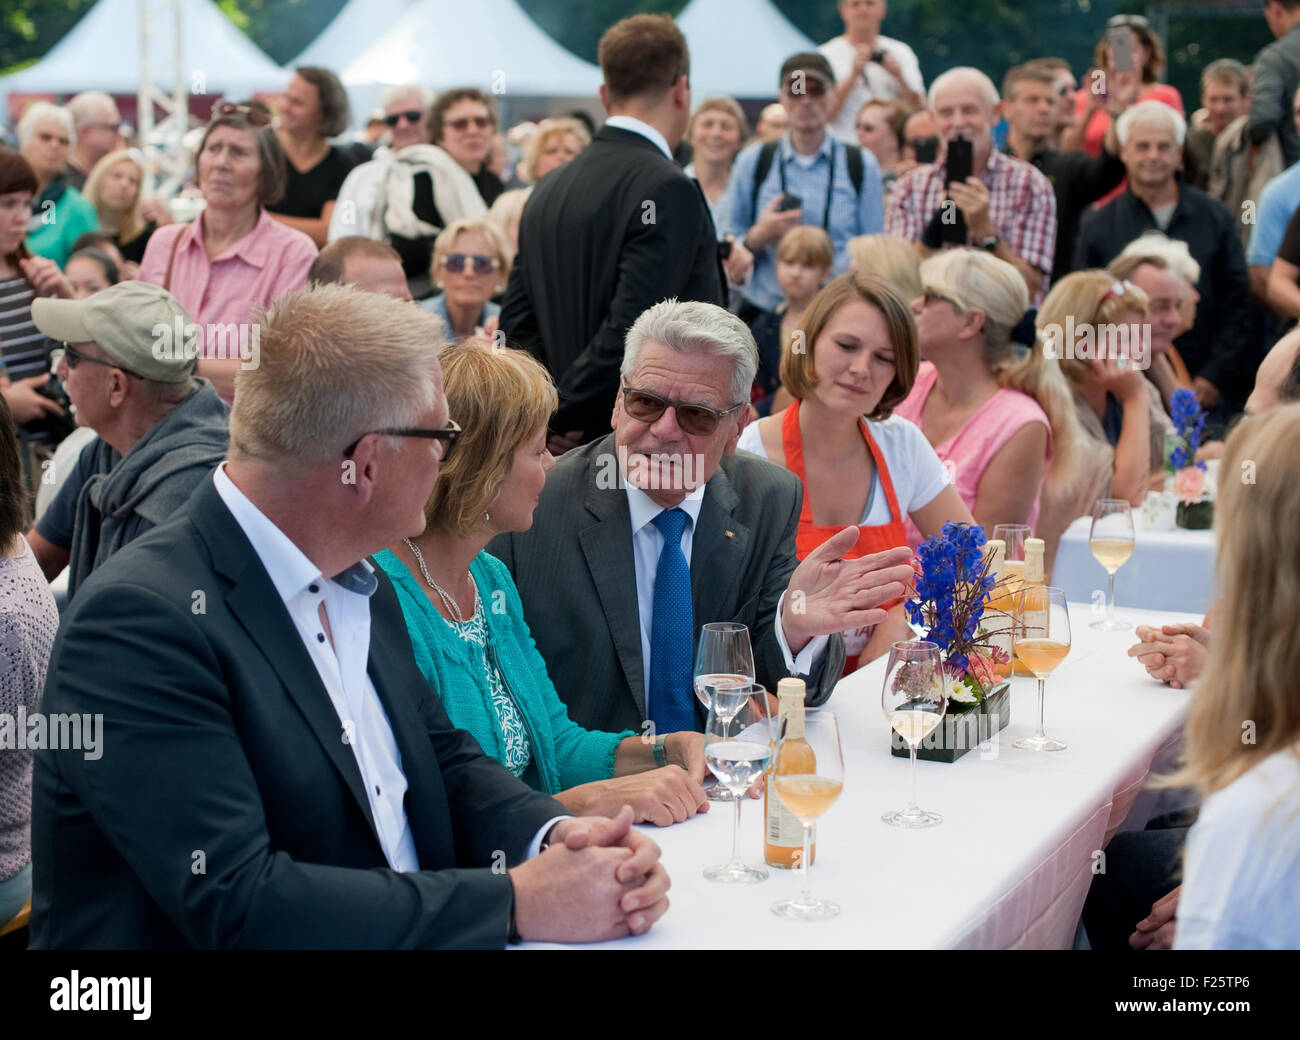 Berlin, Germany. 12th Sep, 2015. German President Joachim Gauck (C) and his partner Daniela Schadt (2.f.l) sit with staff of the Tafel charity in the gardens of Schloss Bellevue in Berlin, Germany, 12 September 2015. Today is the second day of the citizens' festival. PHOTO: KLAUS-DIETMAR GABBERT/DPA/Alamy Live News Stock Photo